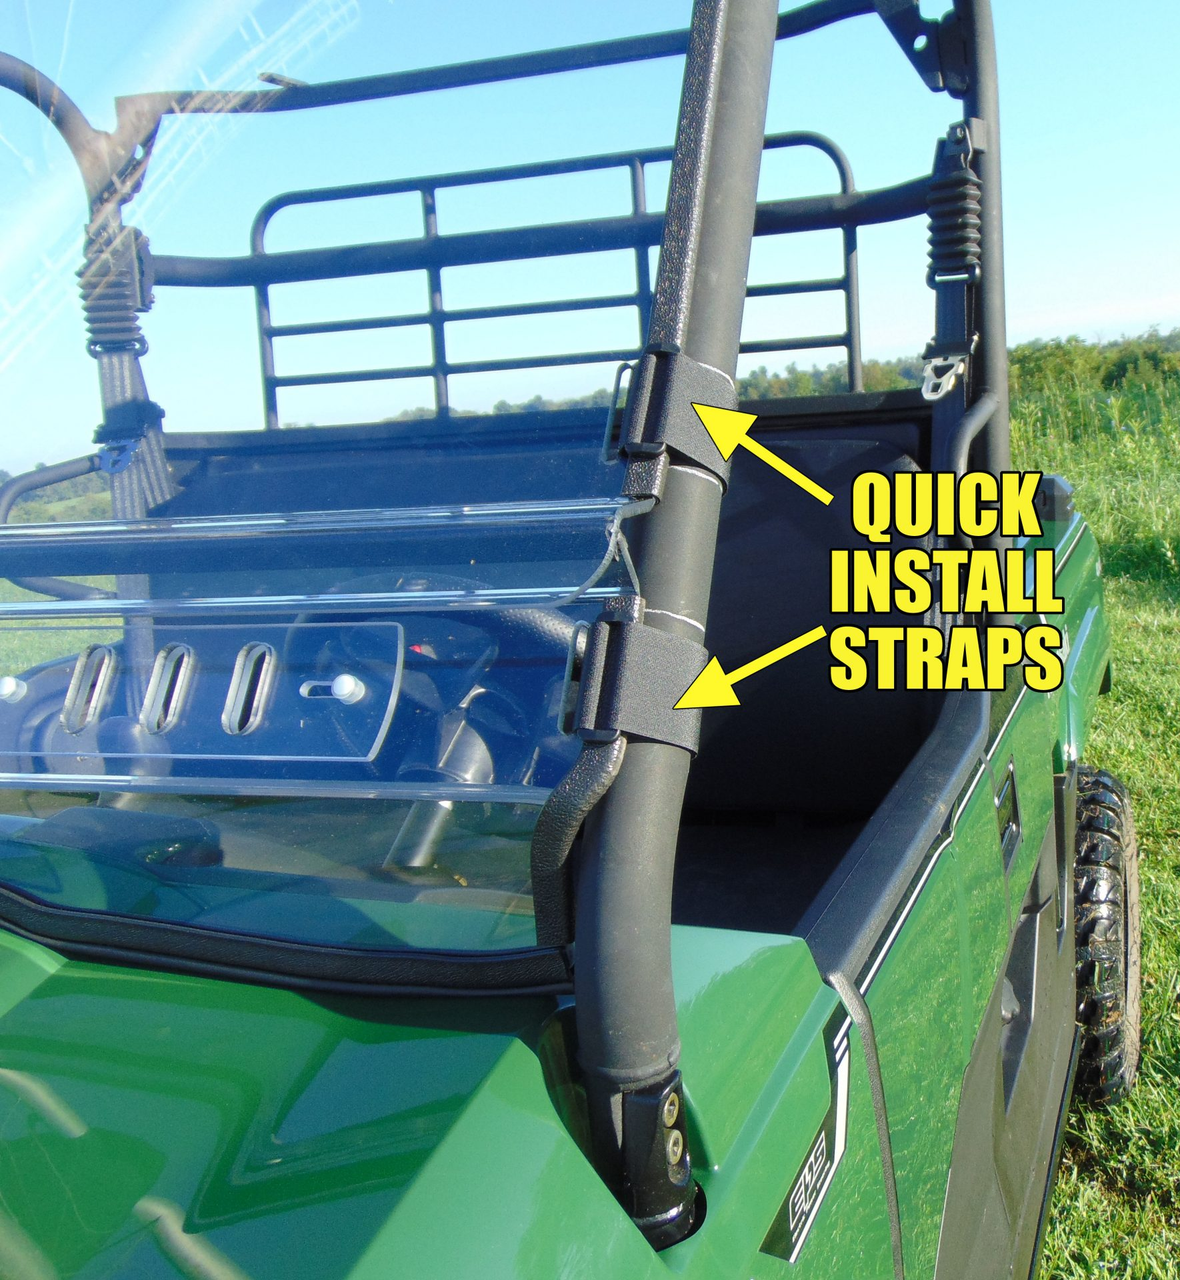 3 Star side x side Arctic Cat Prowler 500S/Tracker 500 2 piece windshield quick install straps